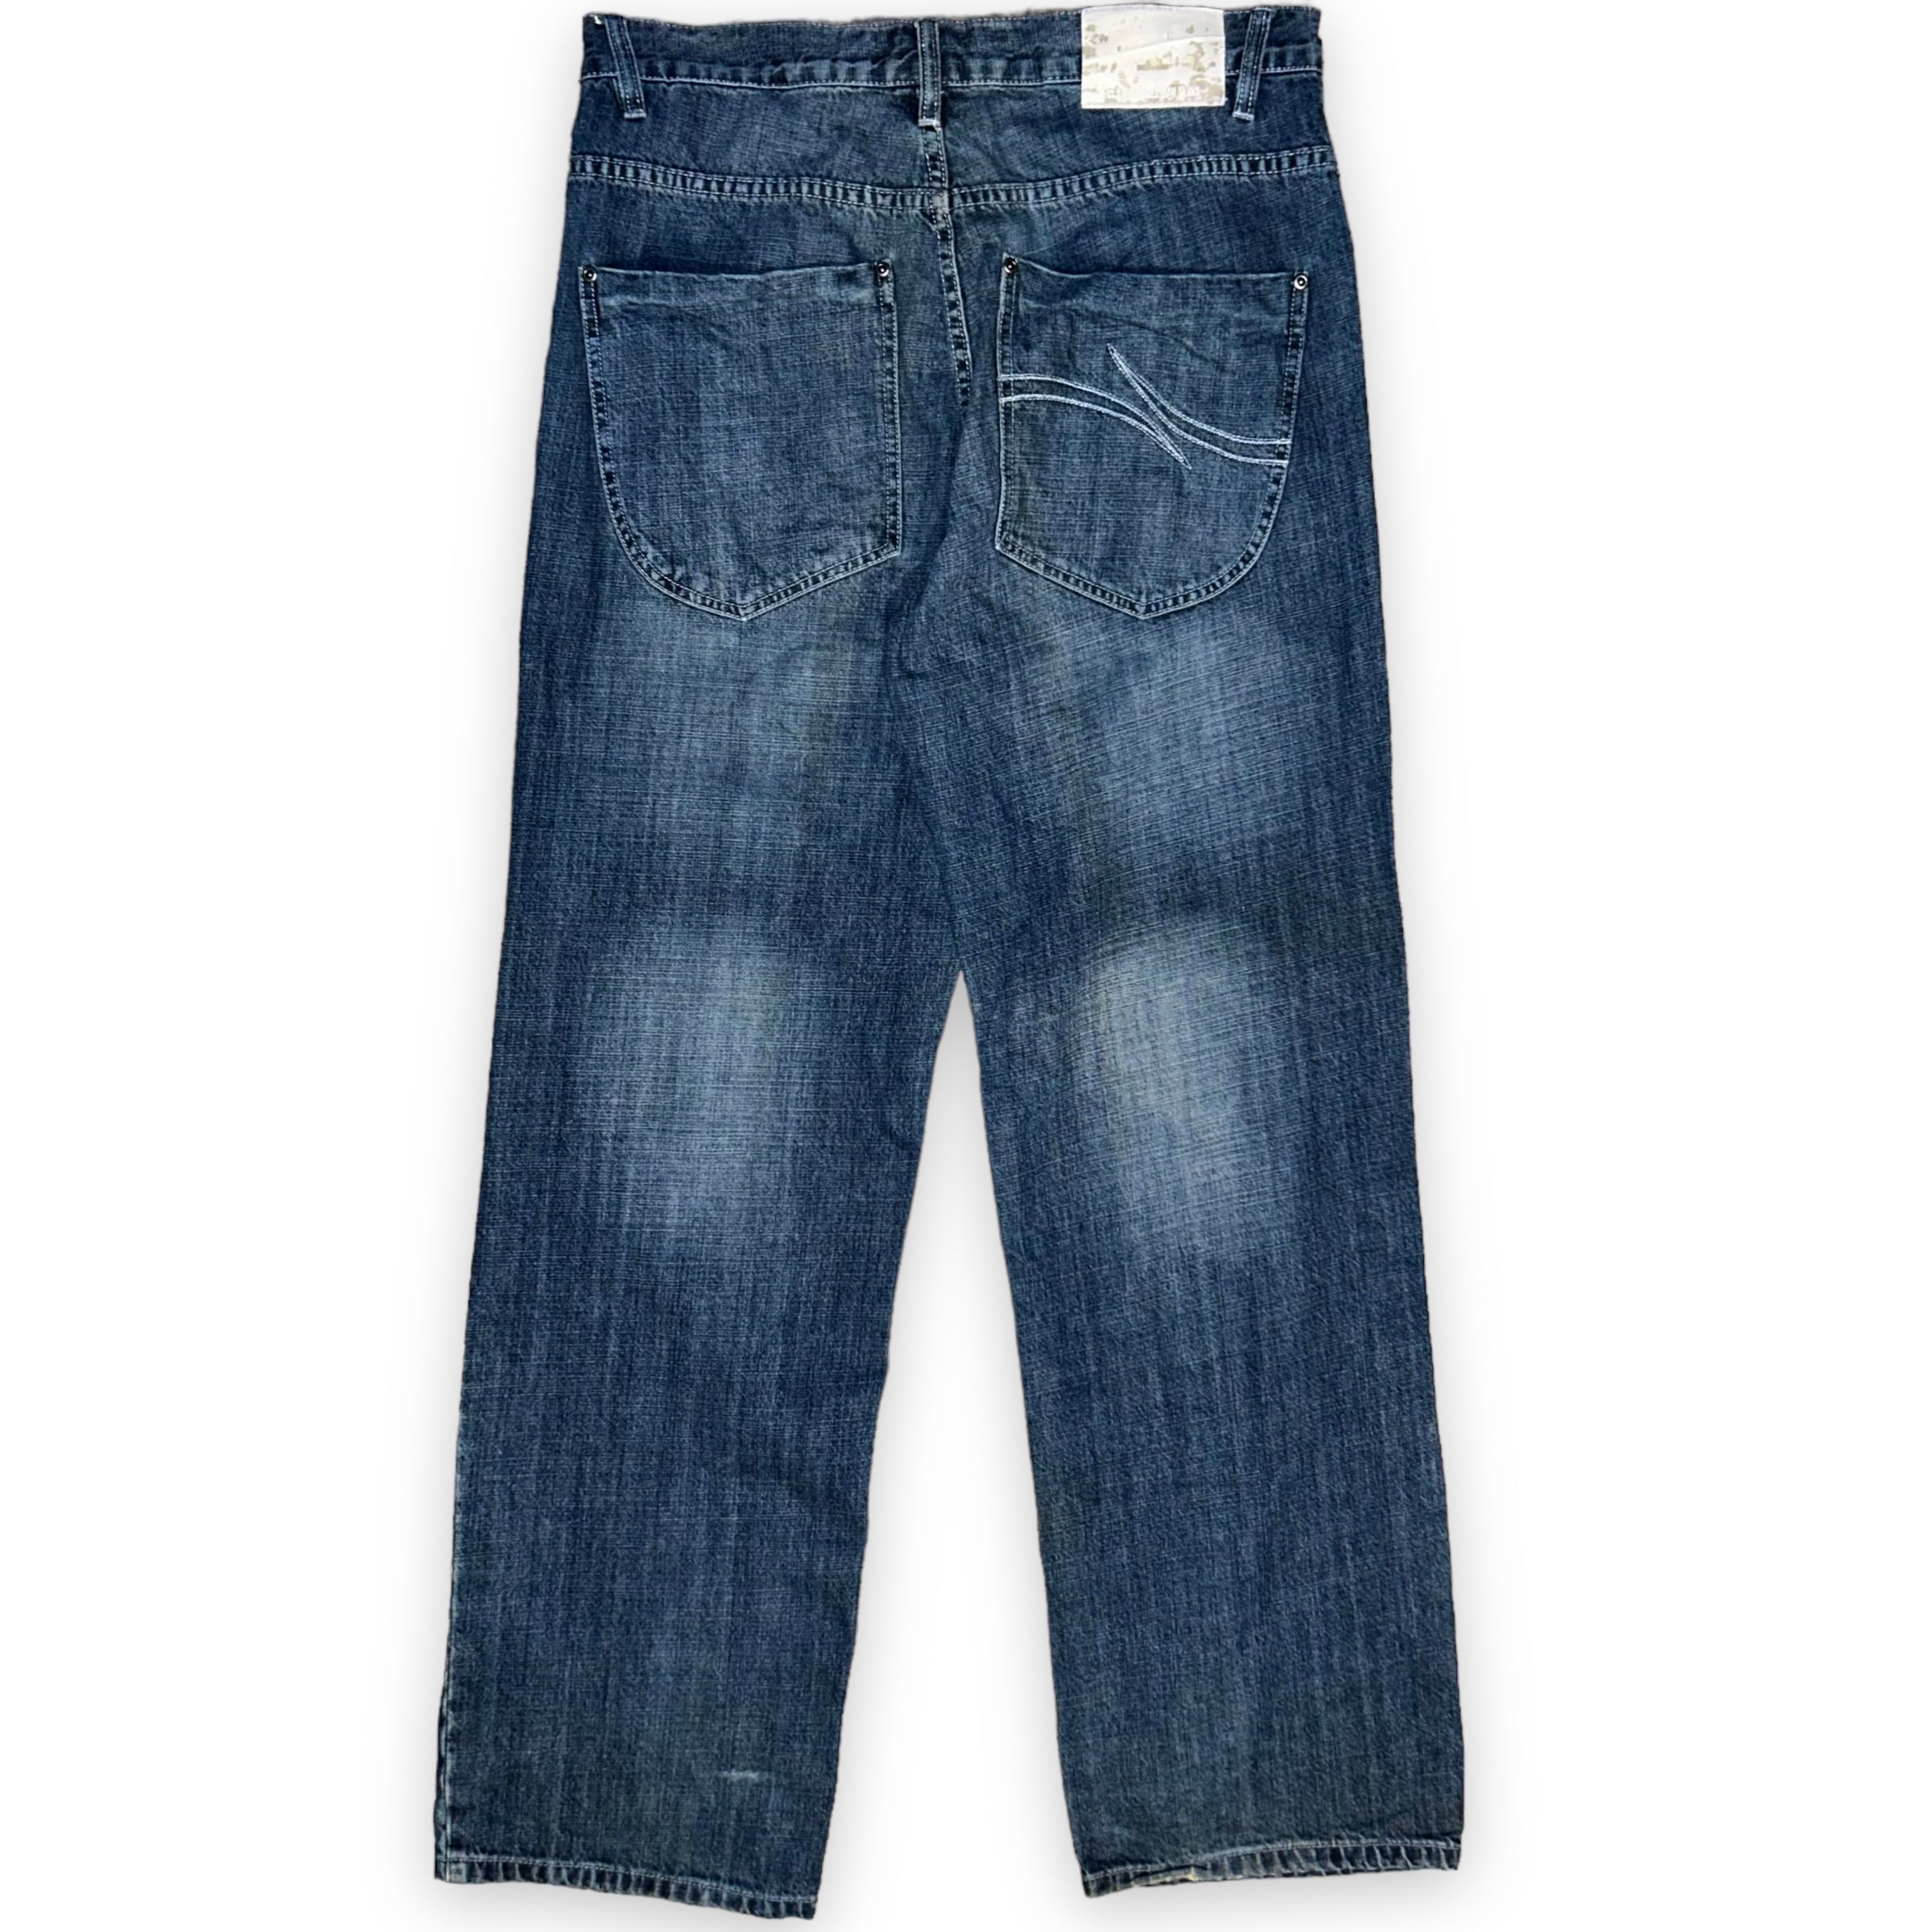 Baggy jeans Phat Farm (32 USA M) - oldstyleclothing